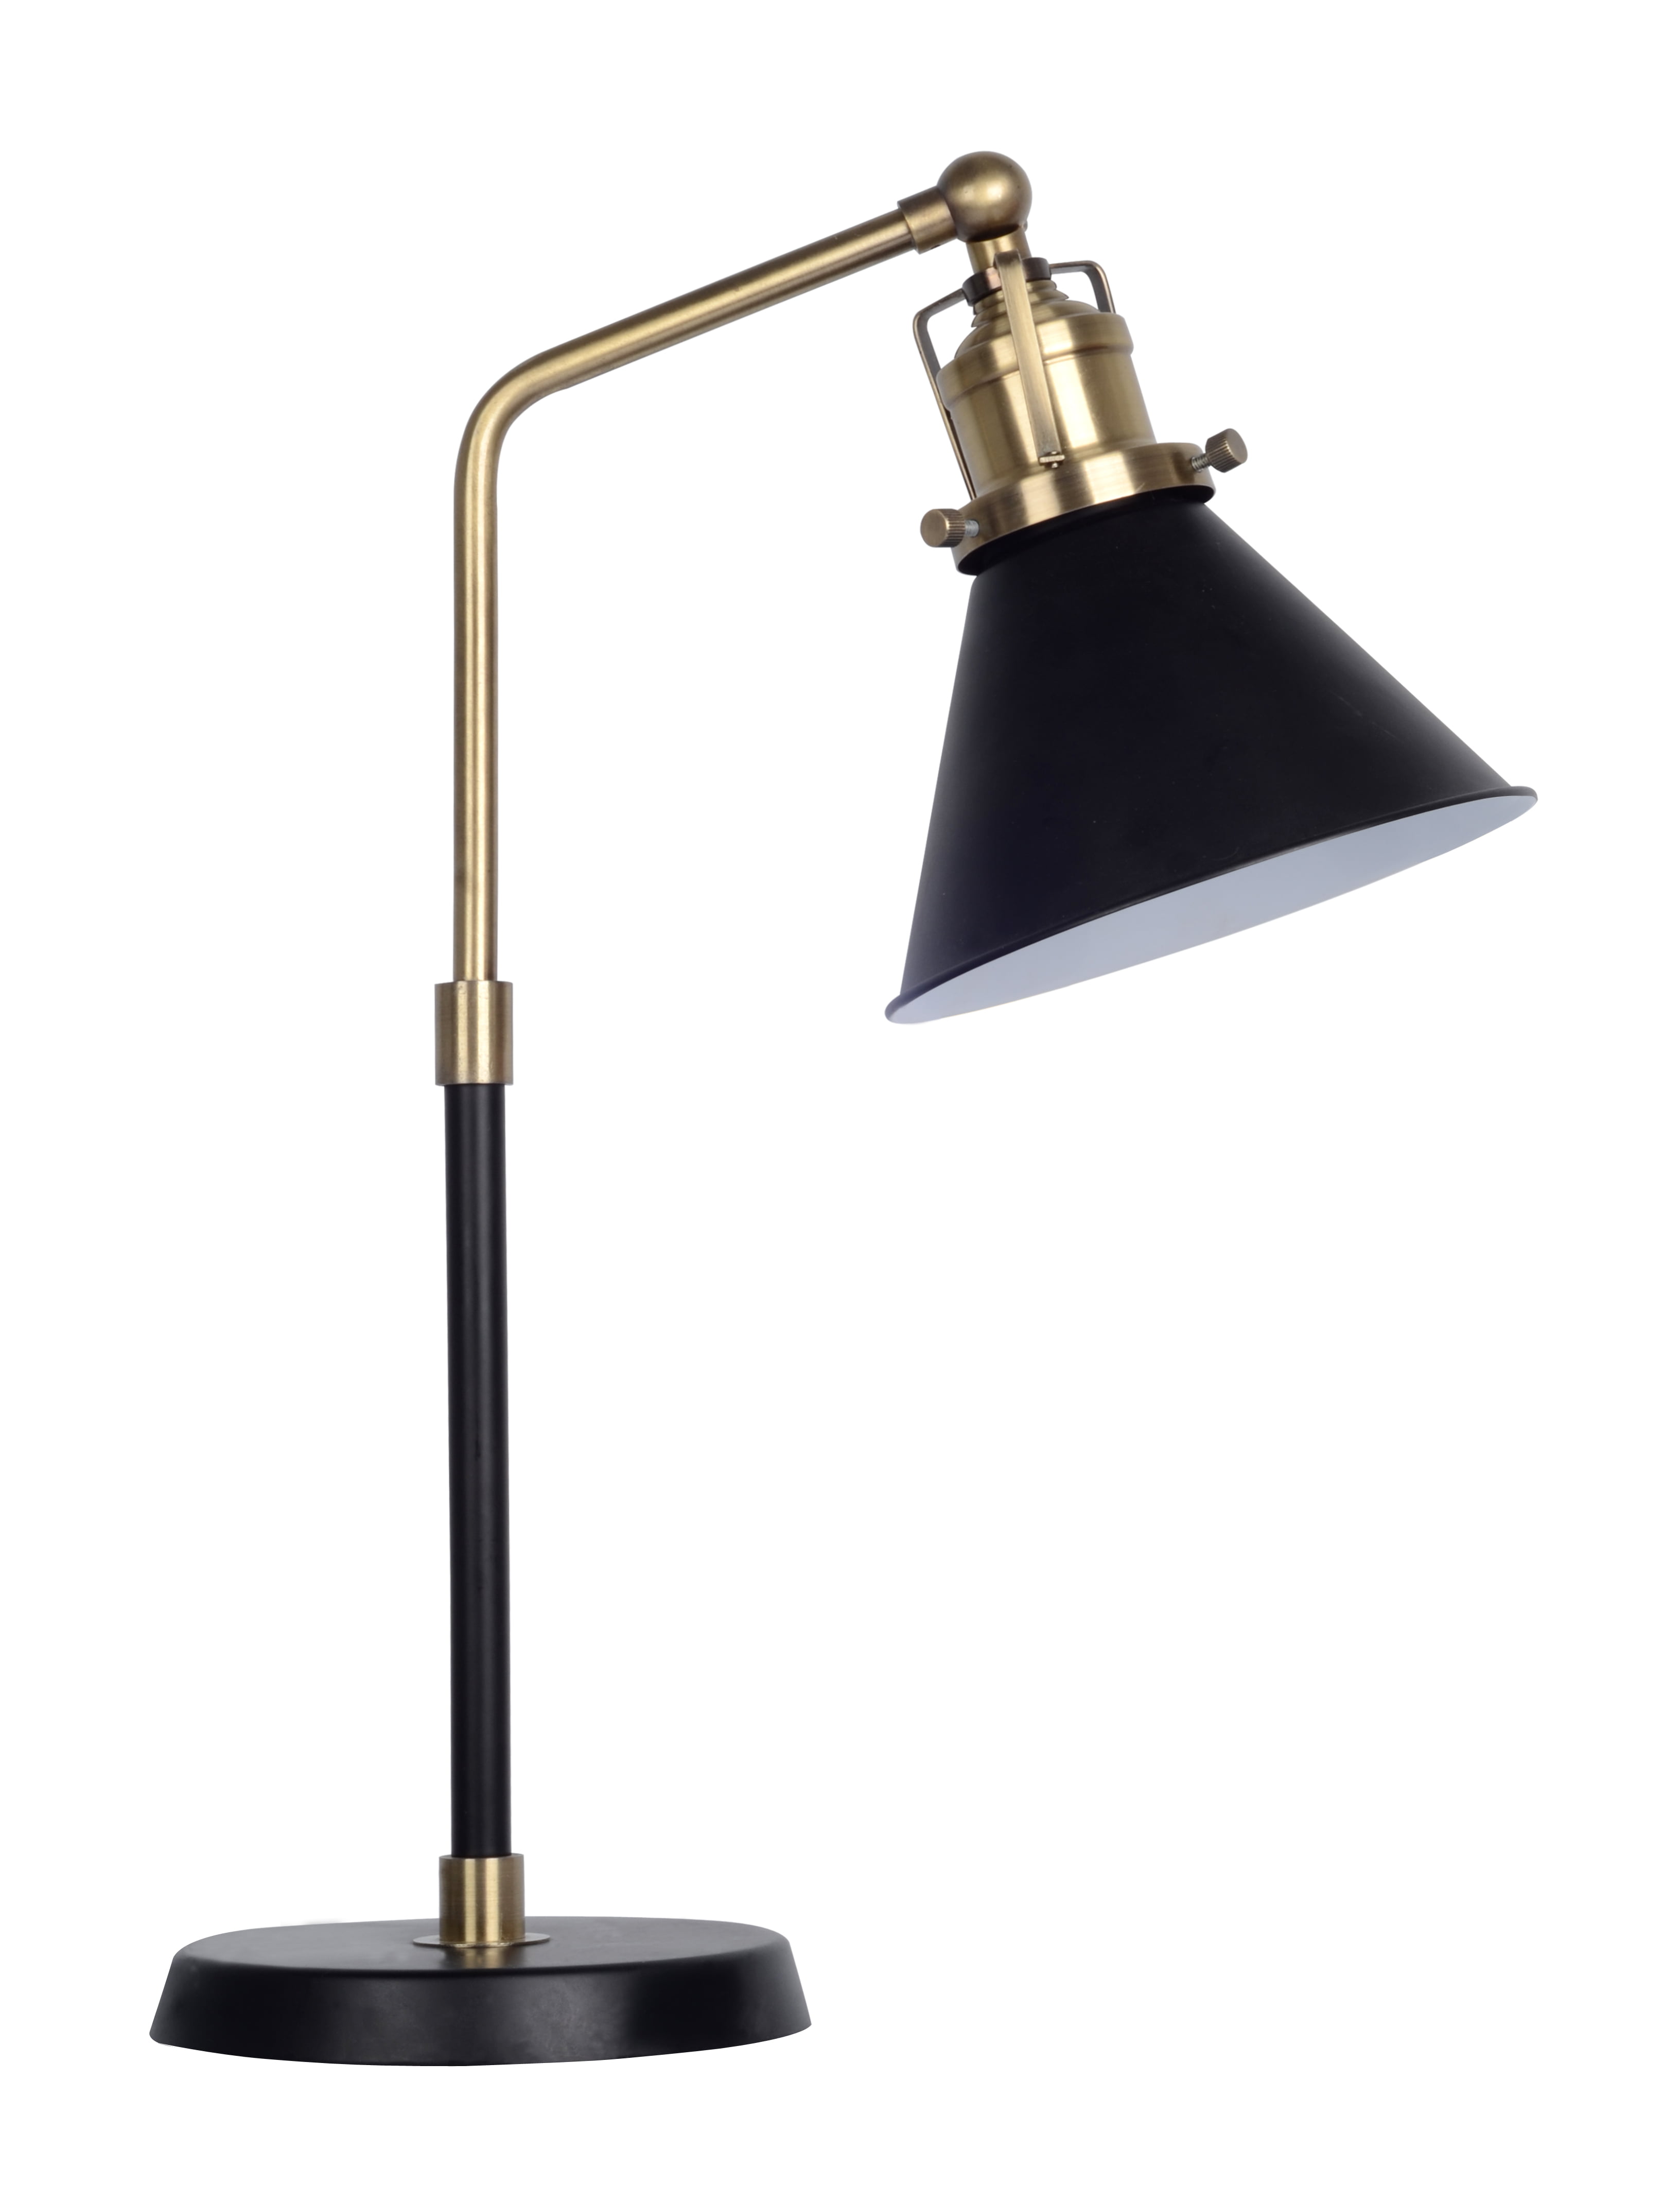 desk lamp with bulb